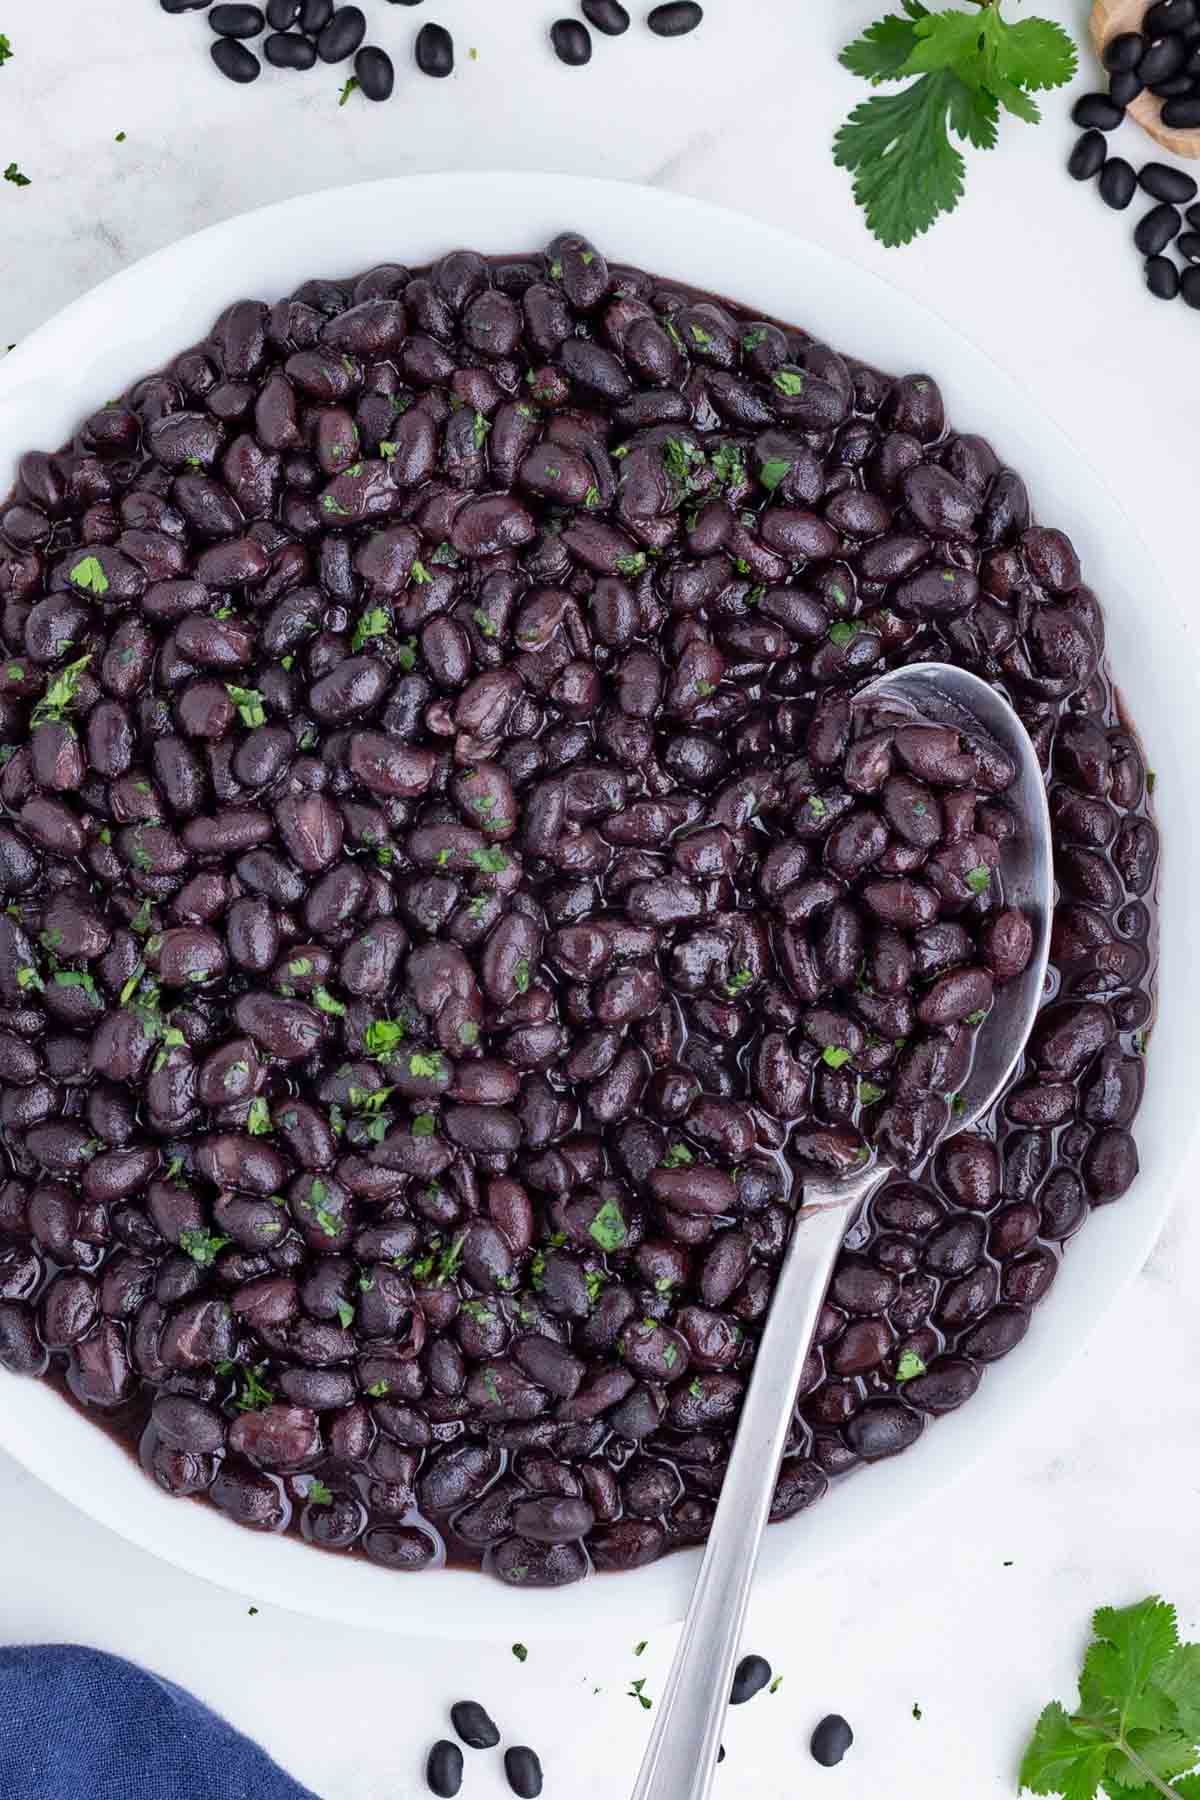 Instant Pot black beans are delicious in tacos and burrito bowls.